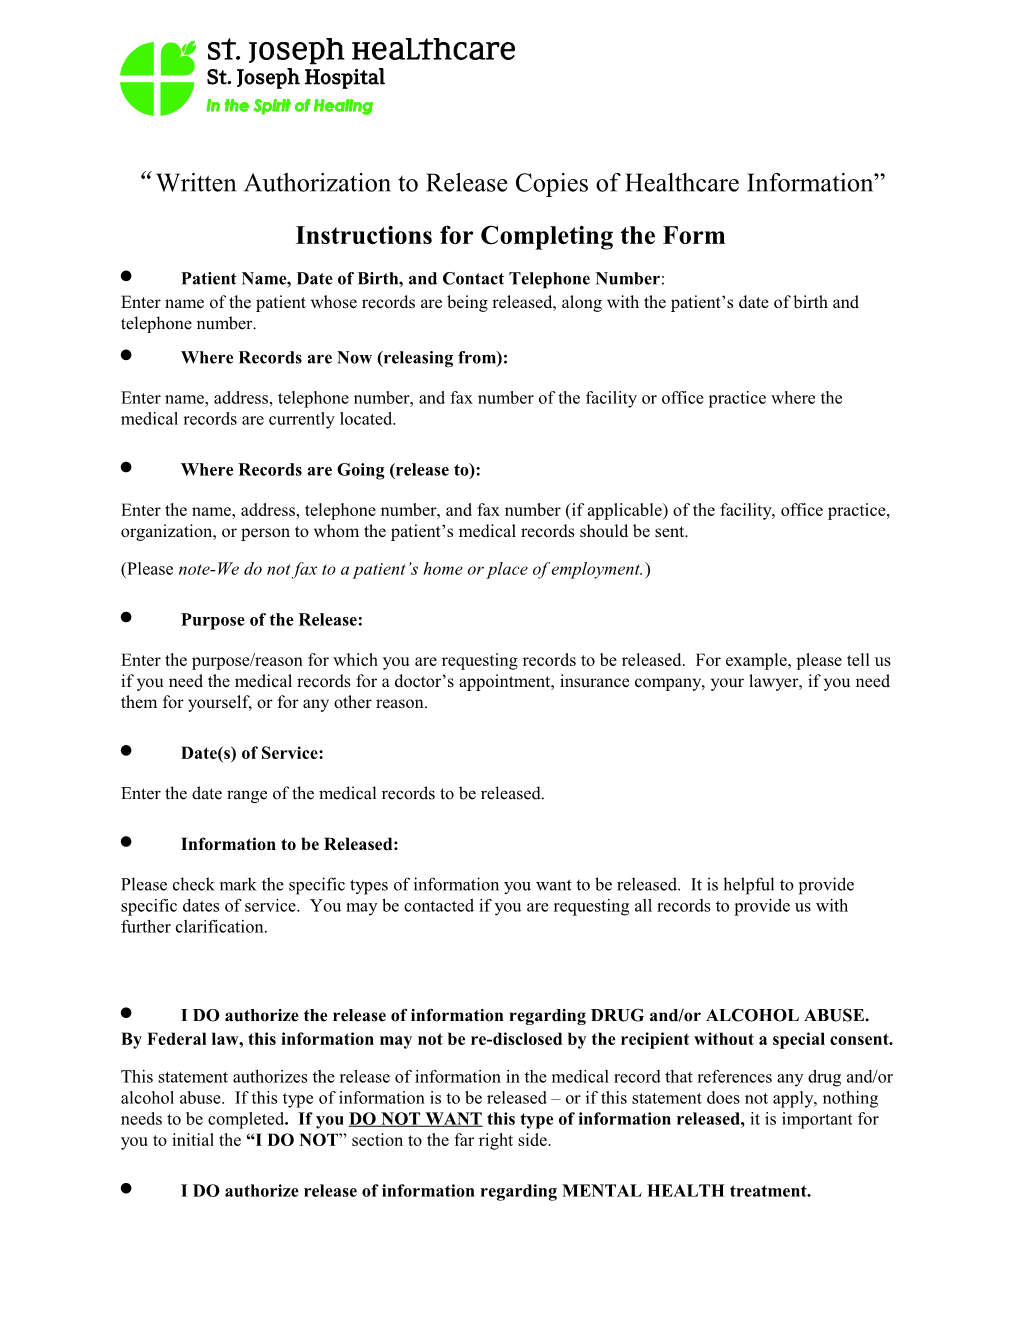 Instructions for Completing the Form